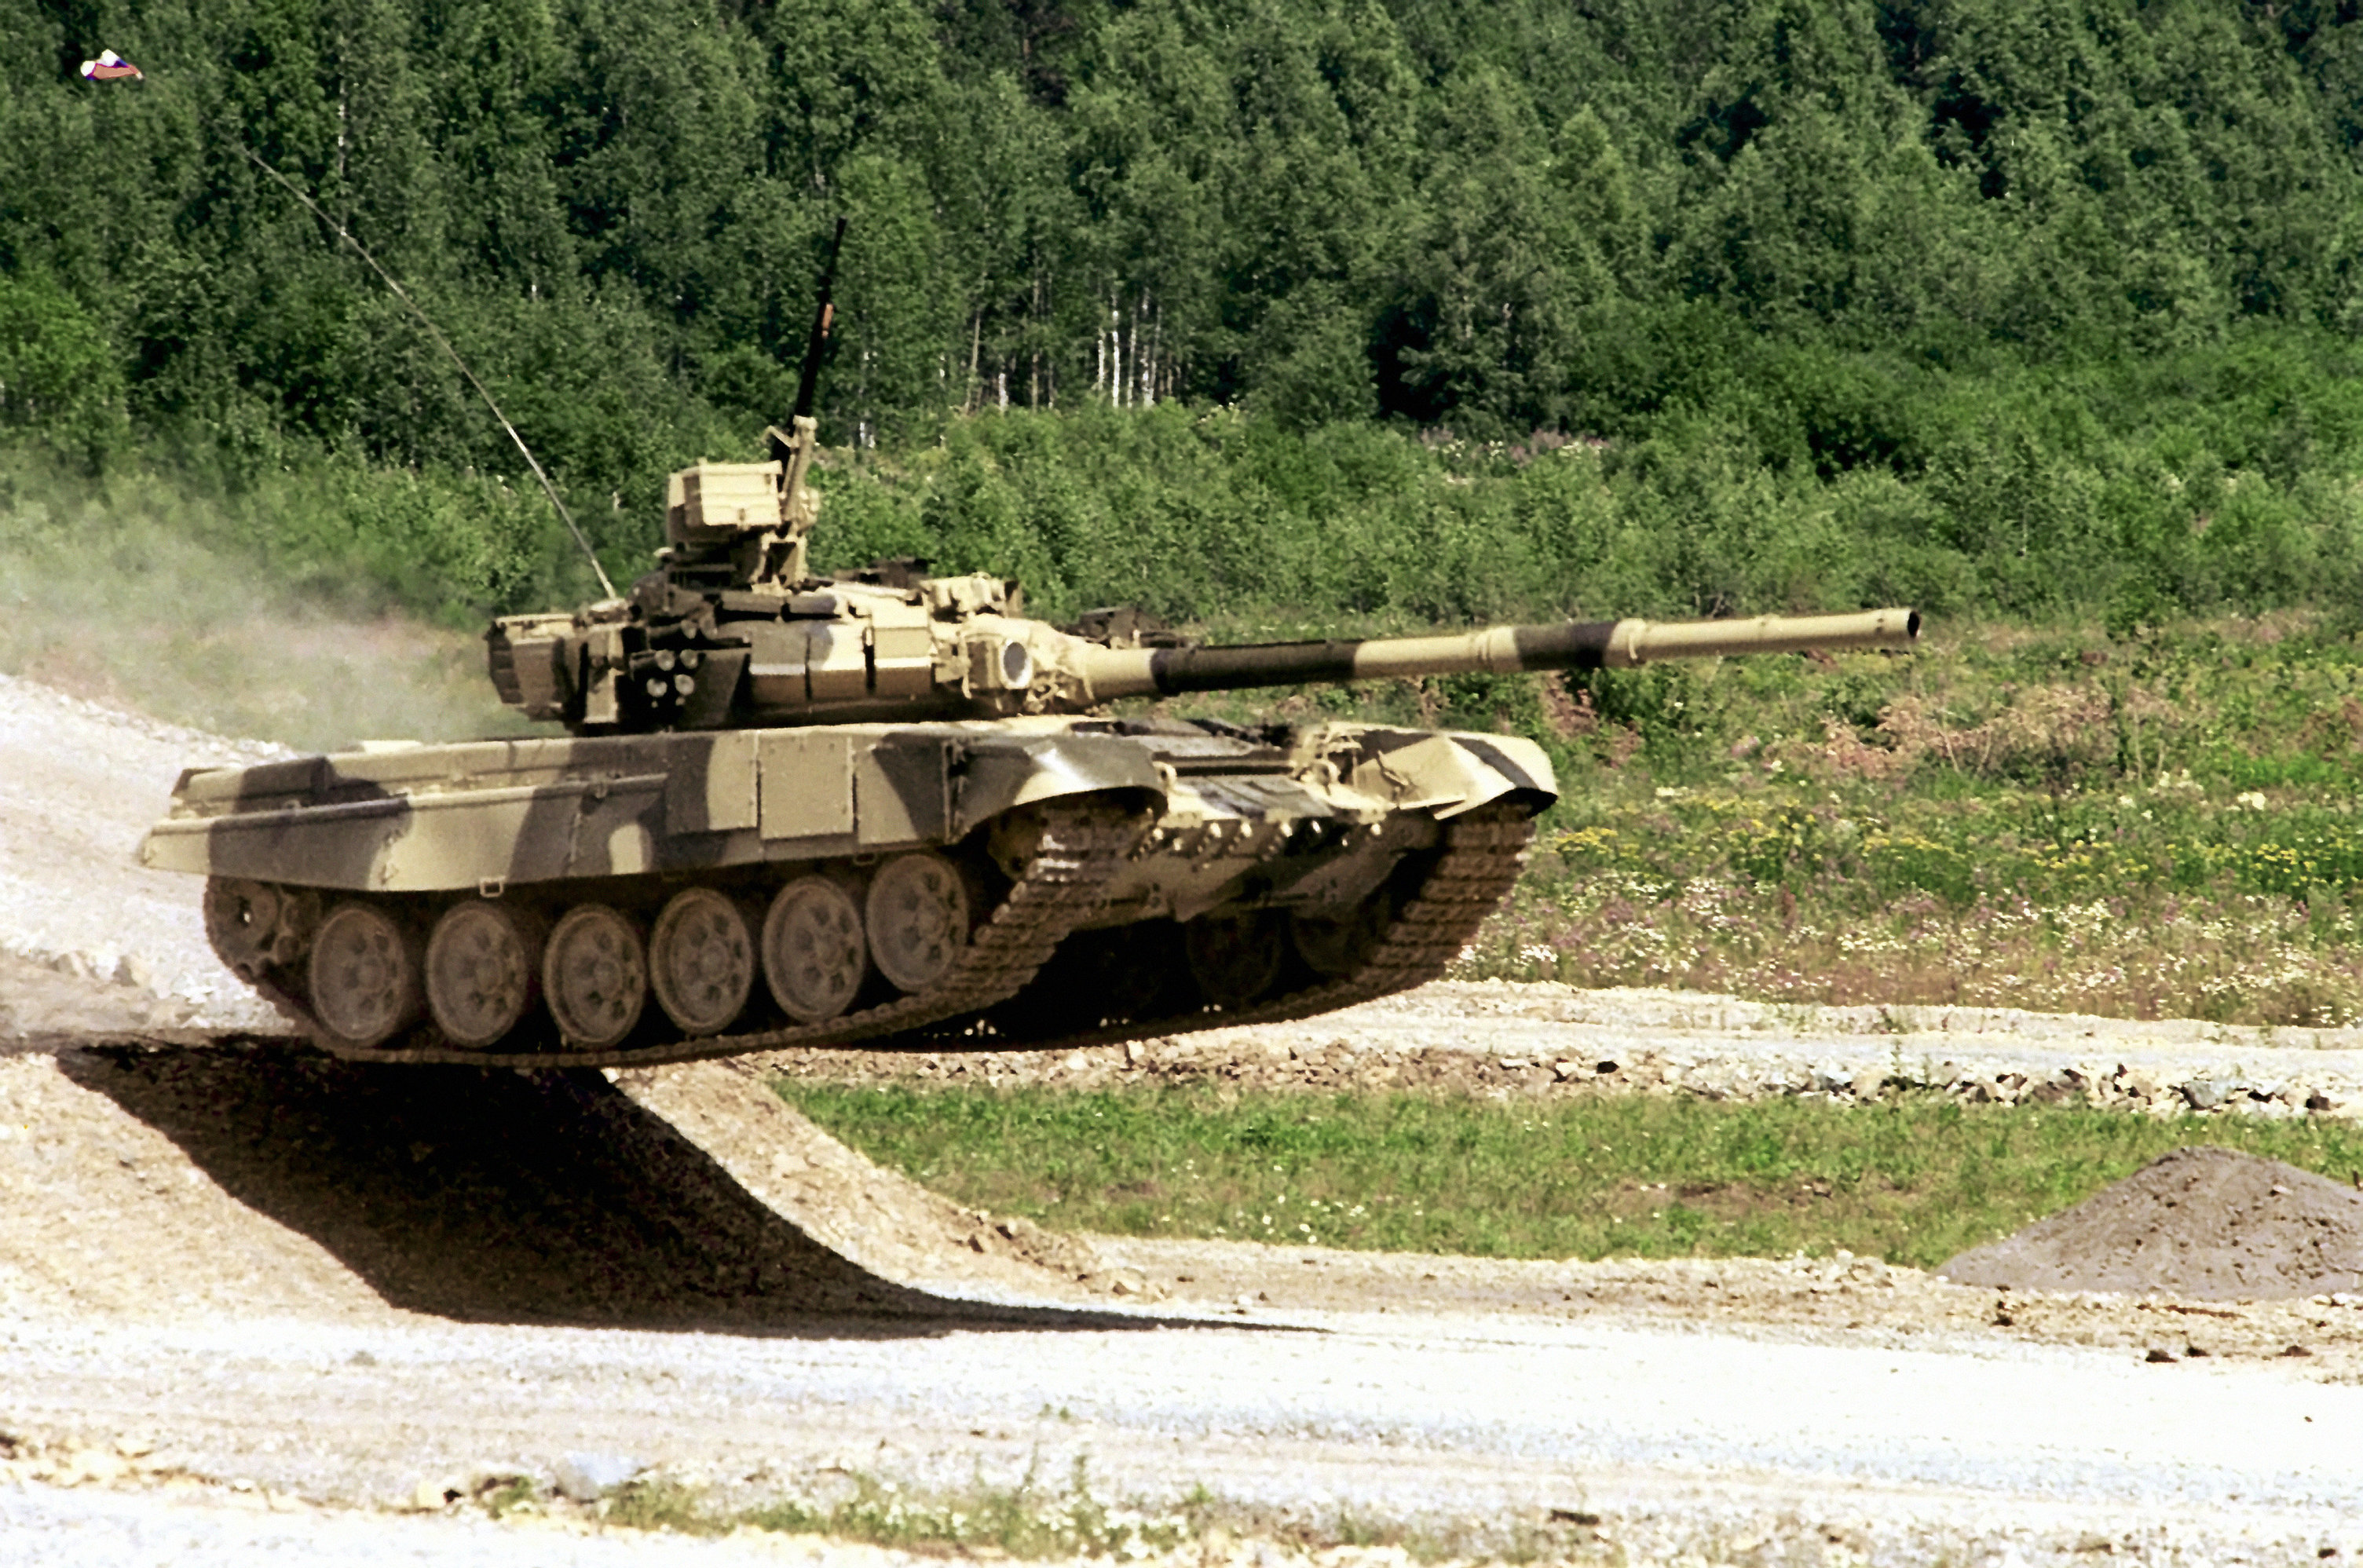 A T-90S performing a sick jump during a military exercise.